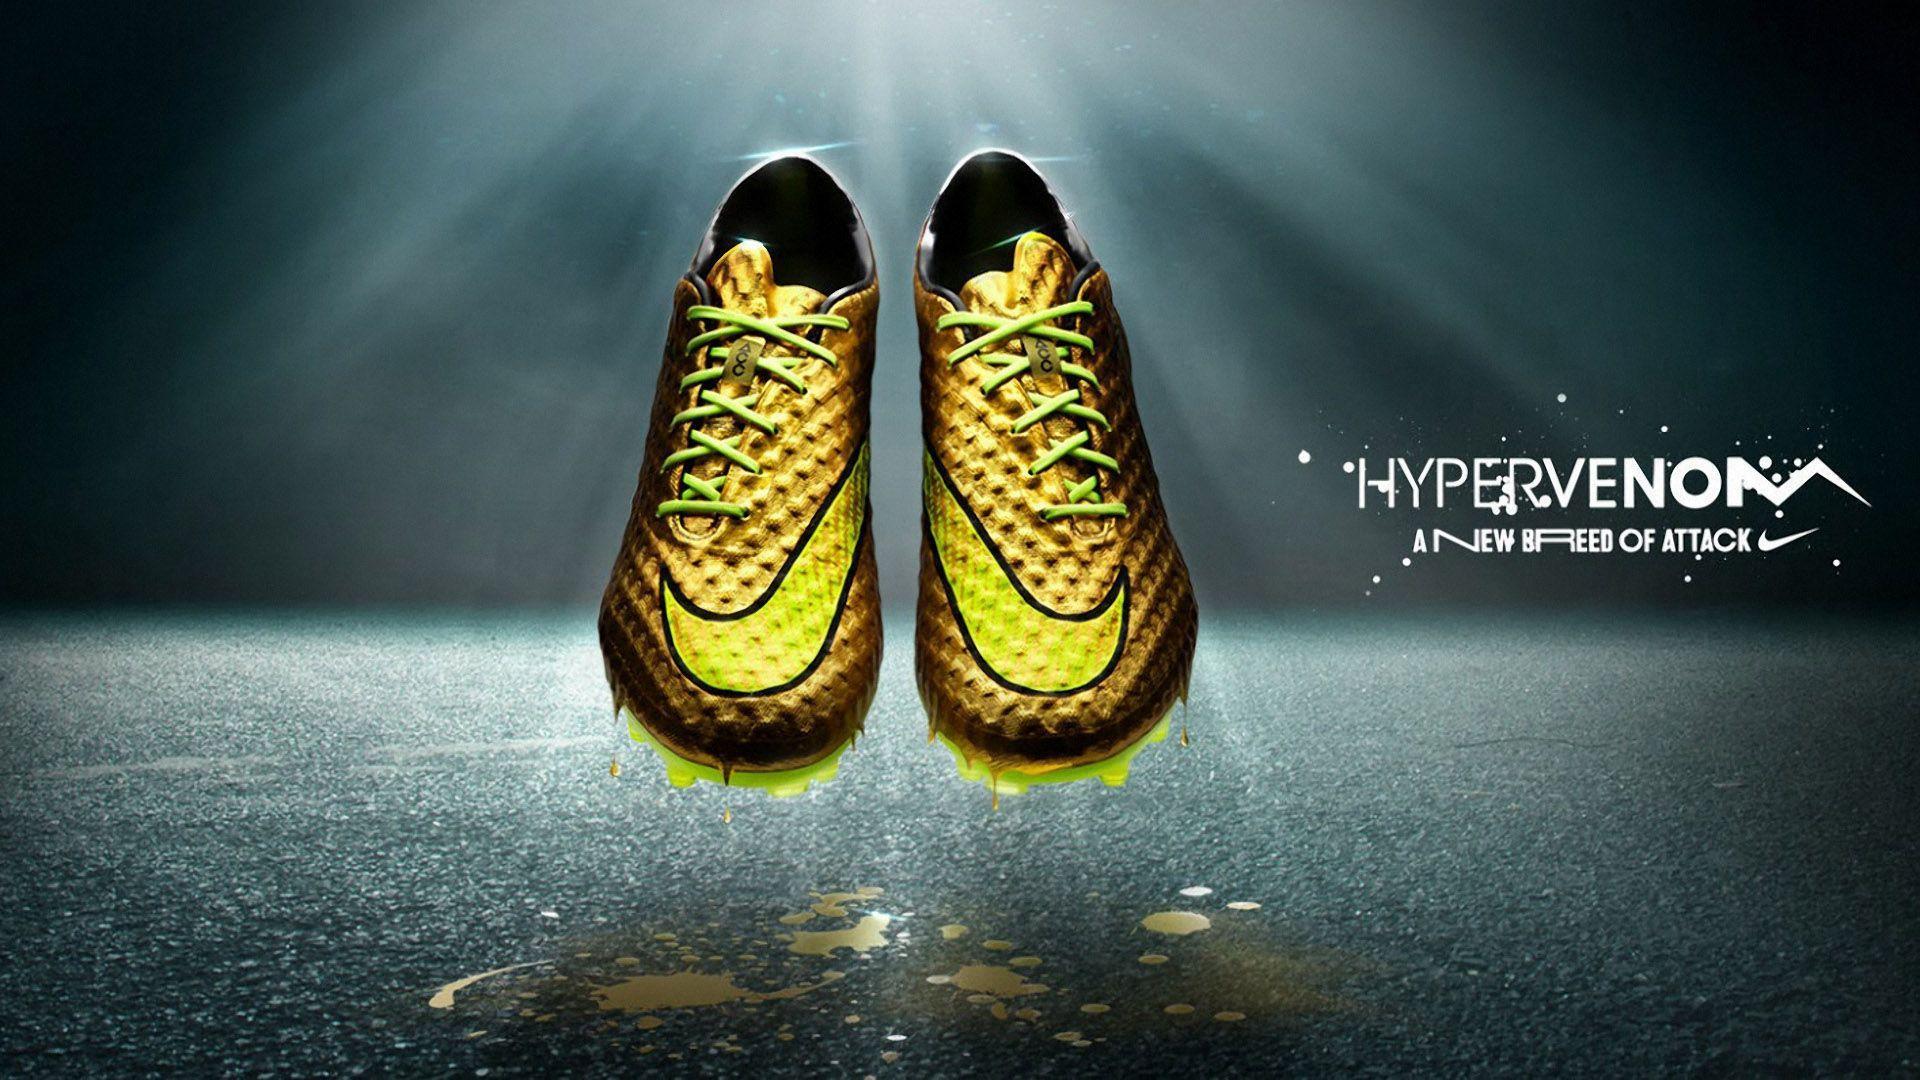 Neymar Nike Hypervenom Gold 2014 World Cup Boot Wallpapers Wide or